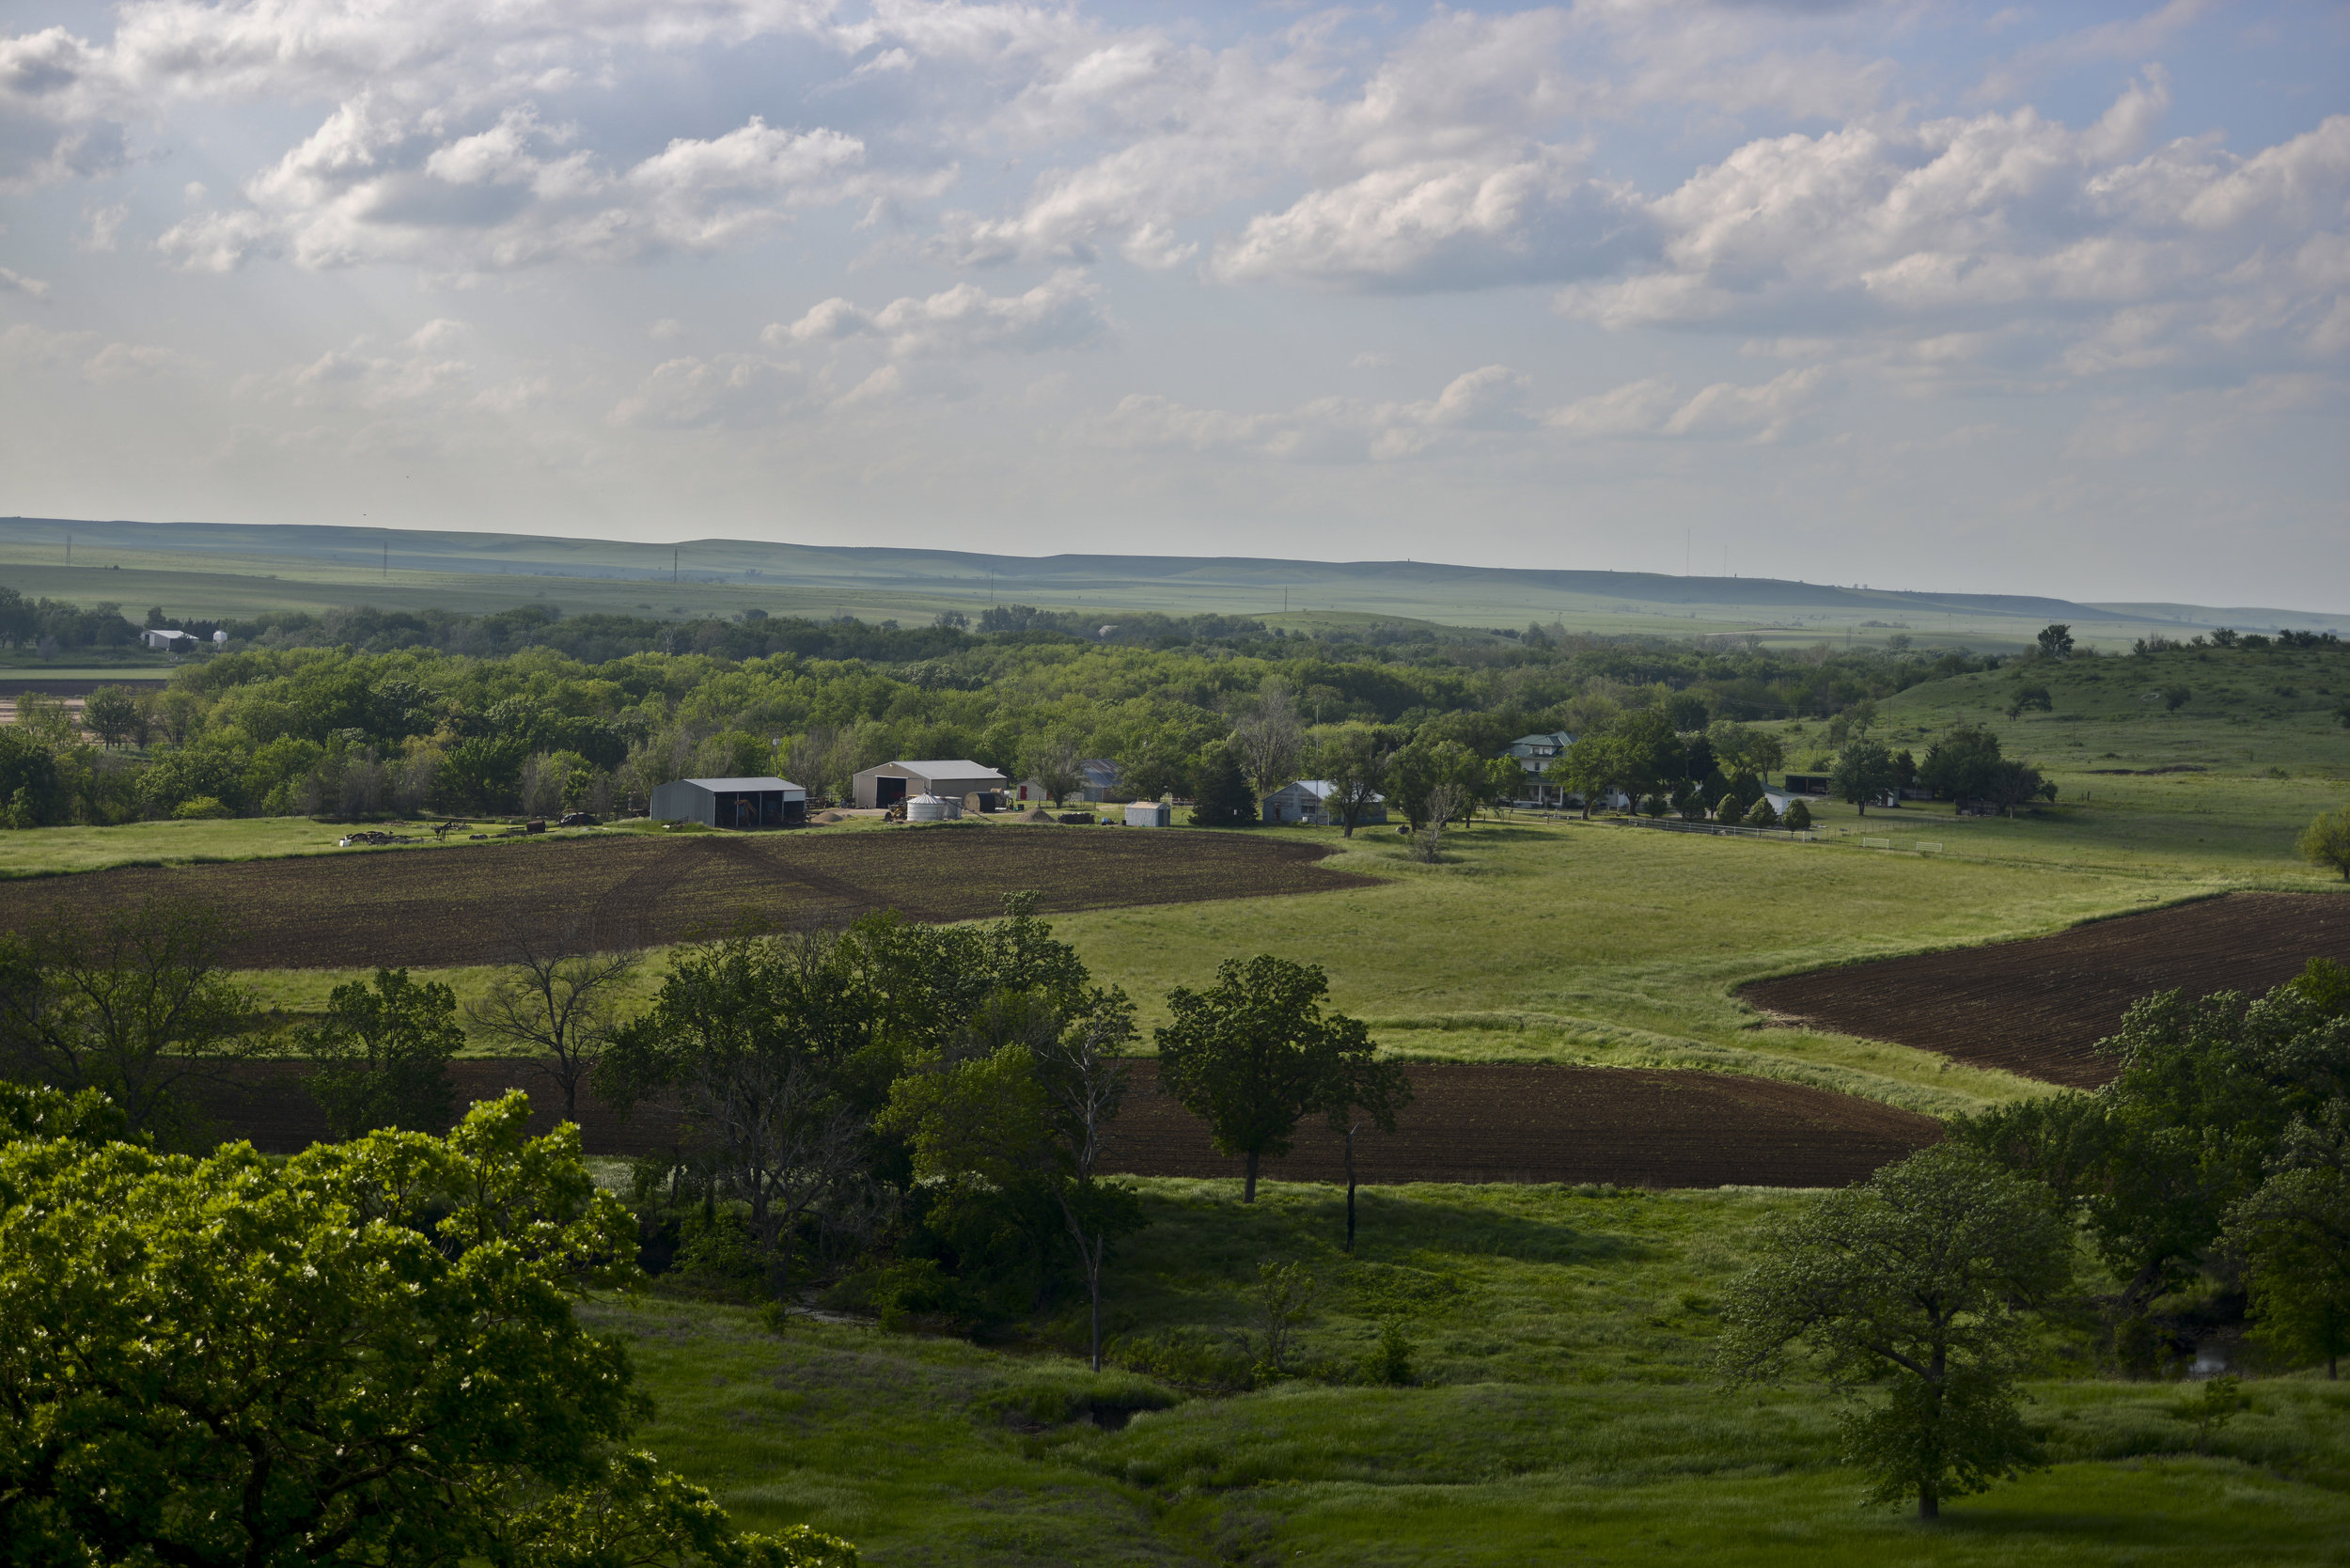 May 25, 2013 - Olson's rock house, old rock house, Barney's hill, and Barney farming (Edited & Compressed)_0075.jpg